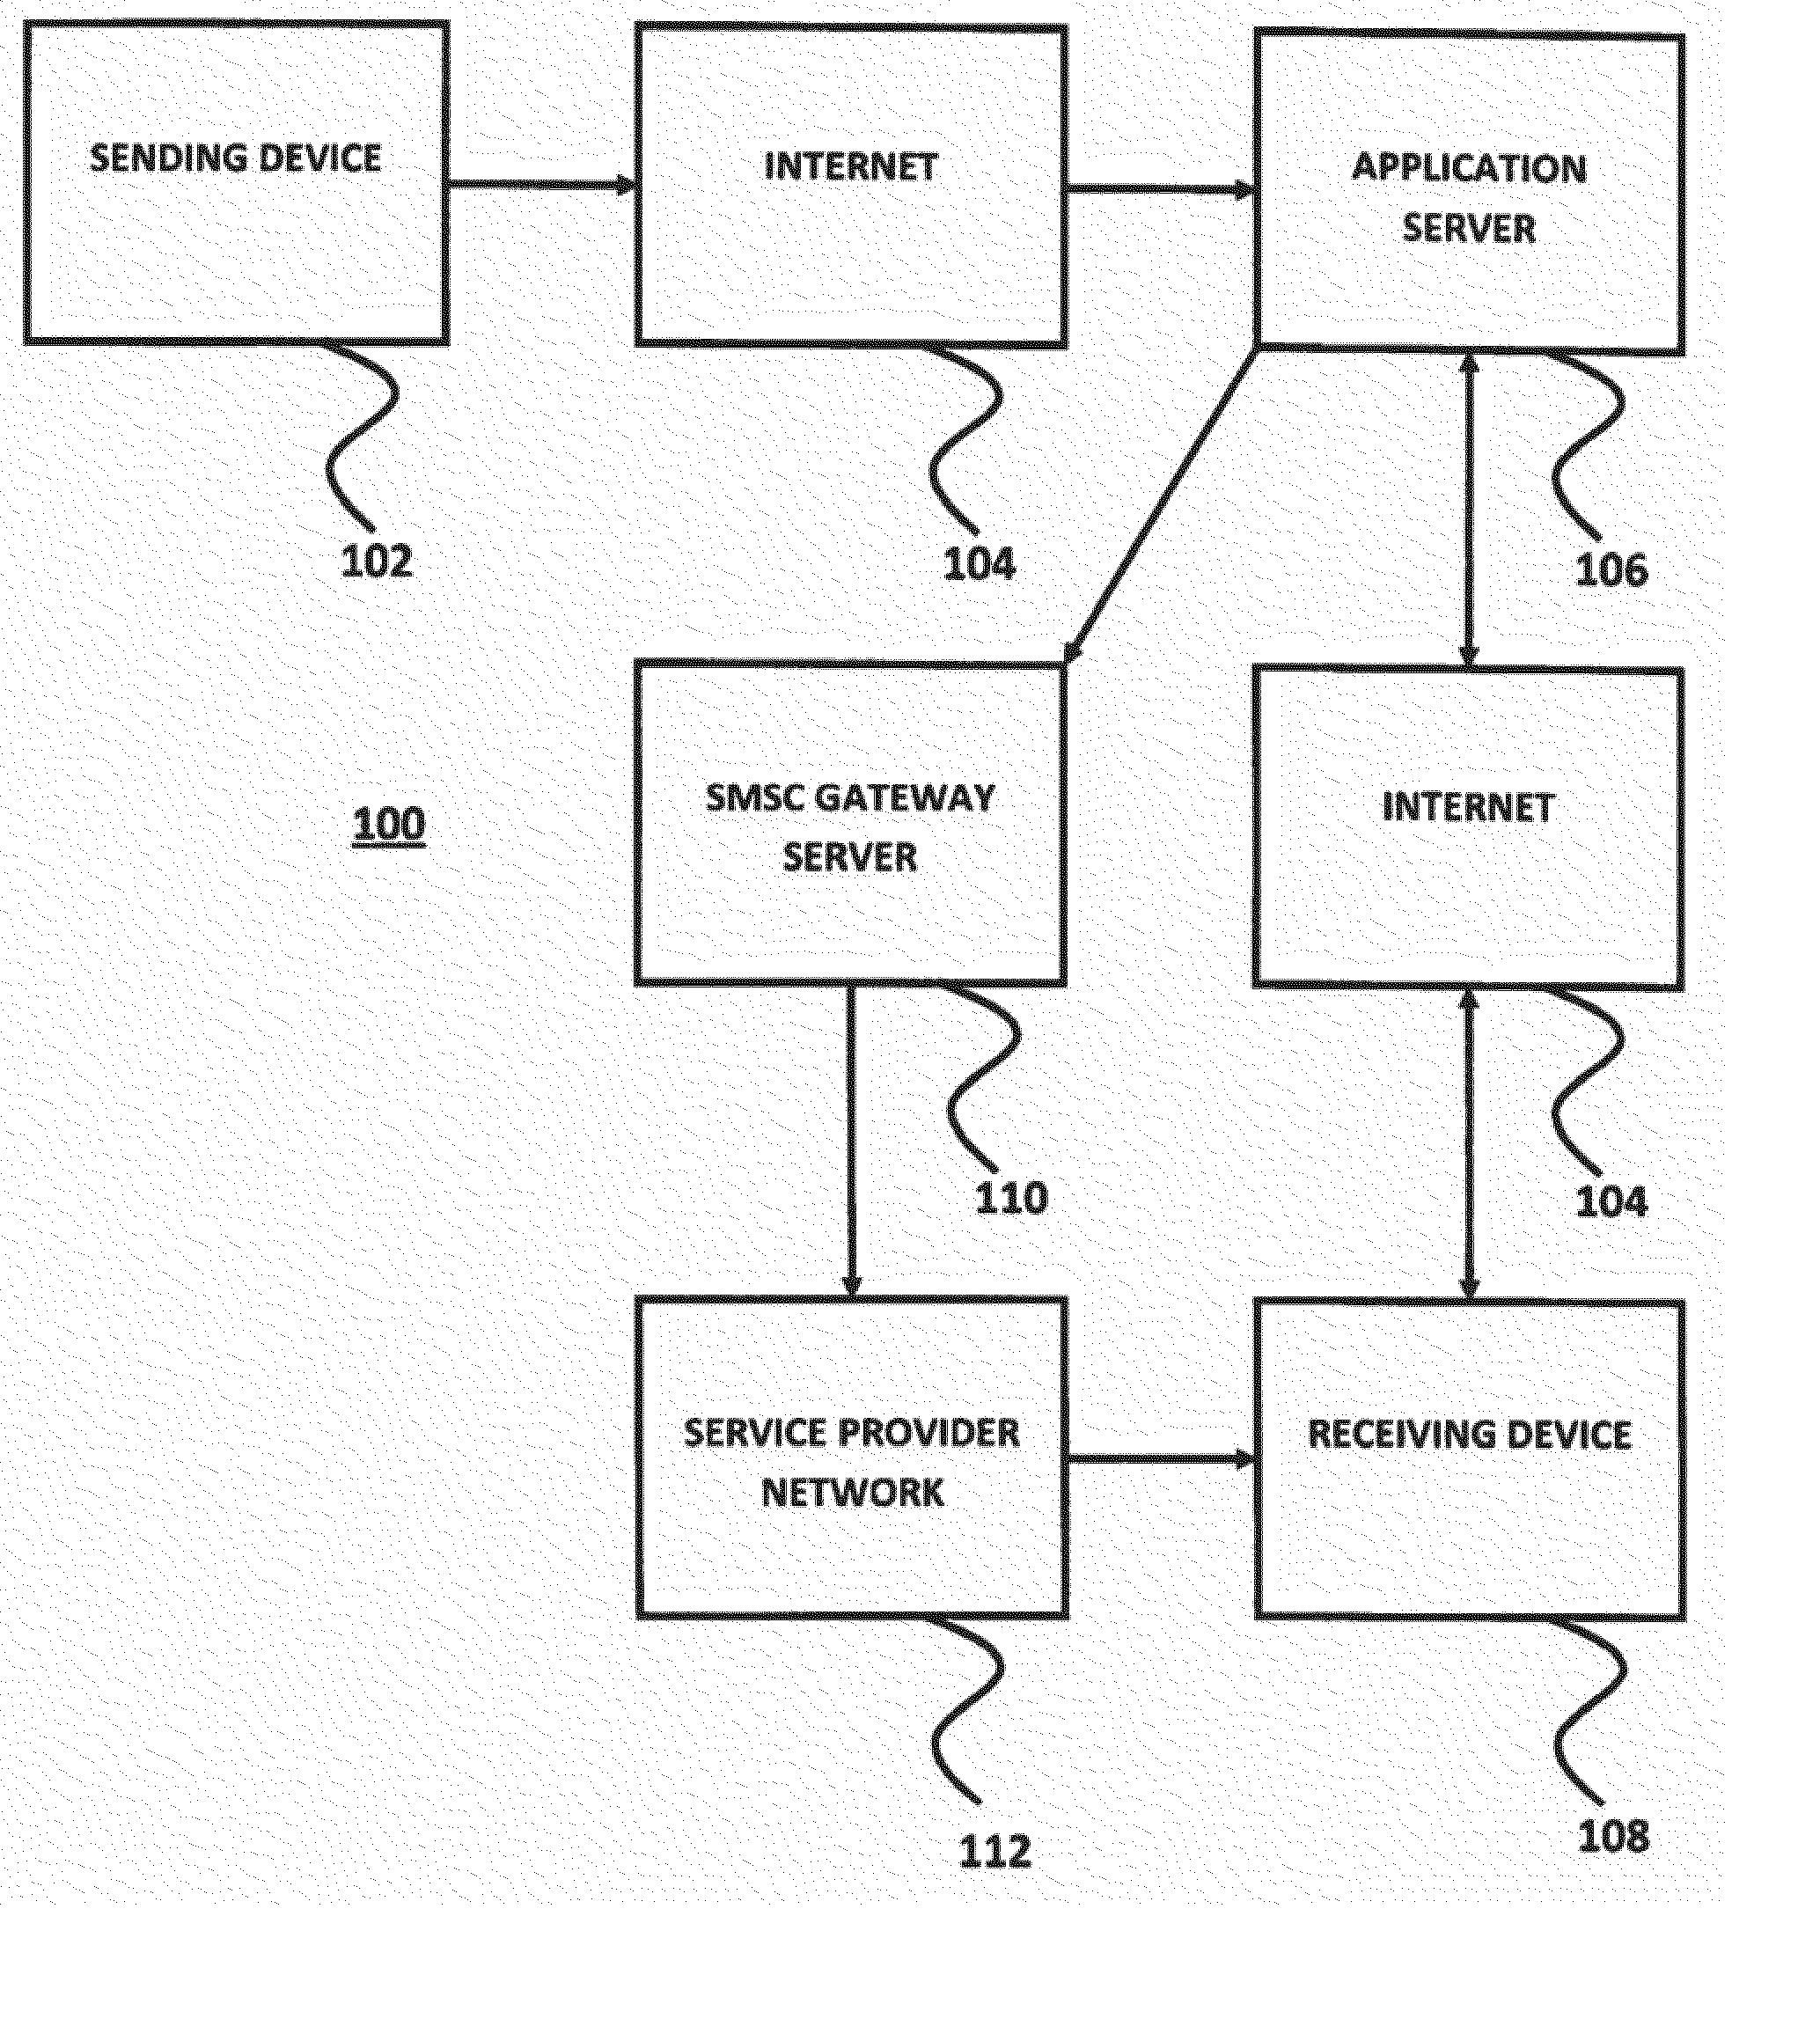 Methods for Virally Distributing Location-Based Applications